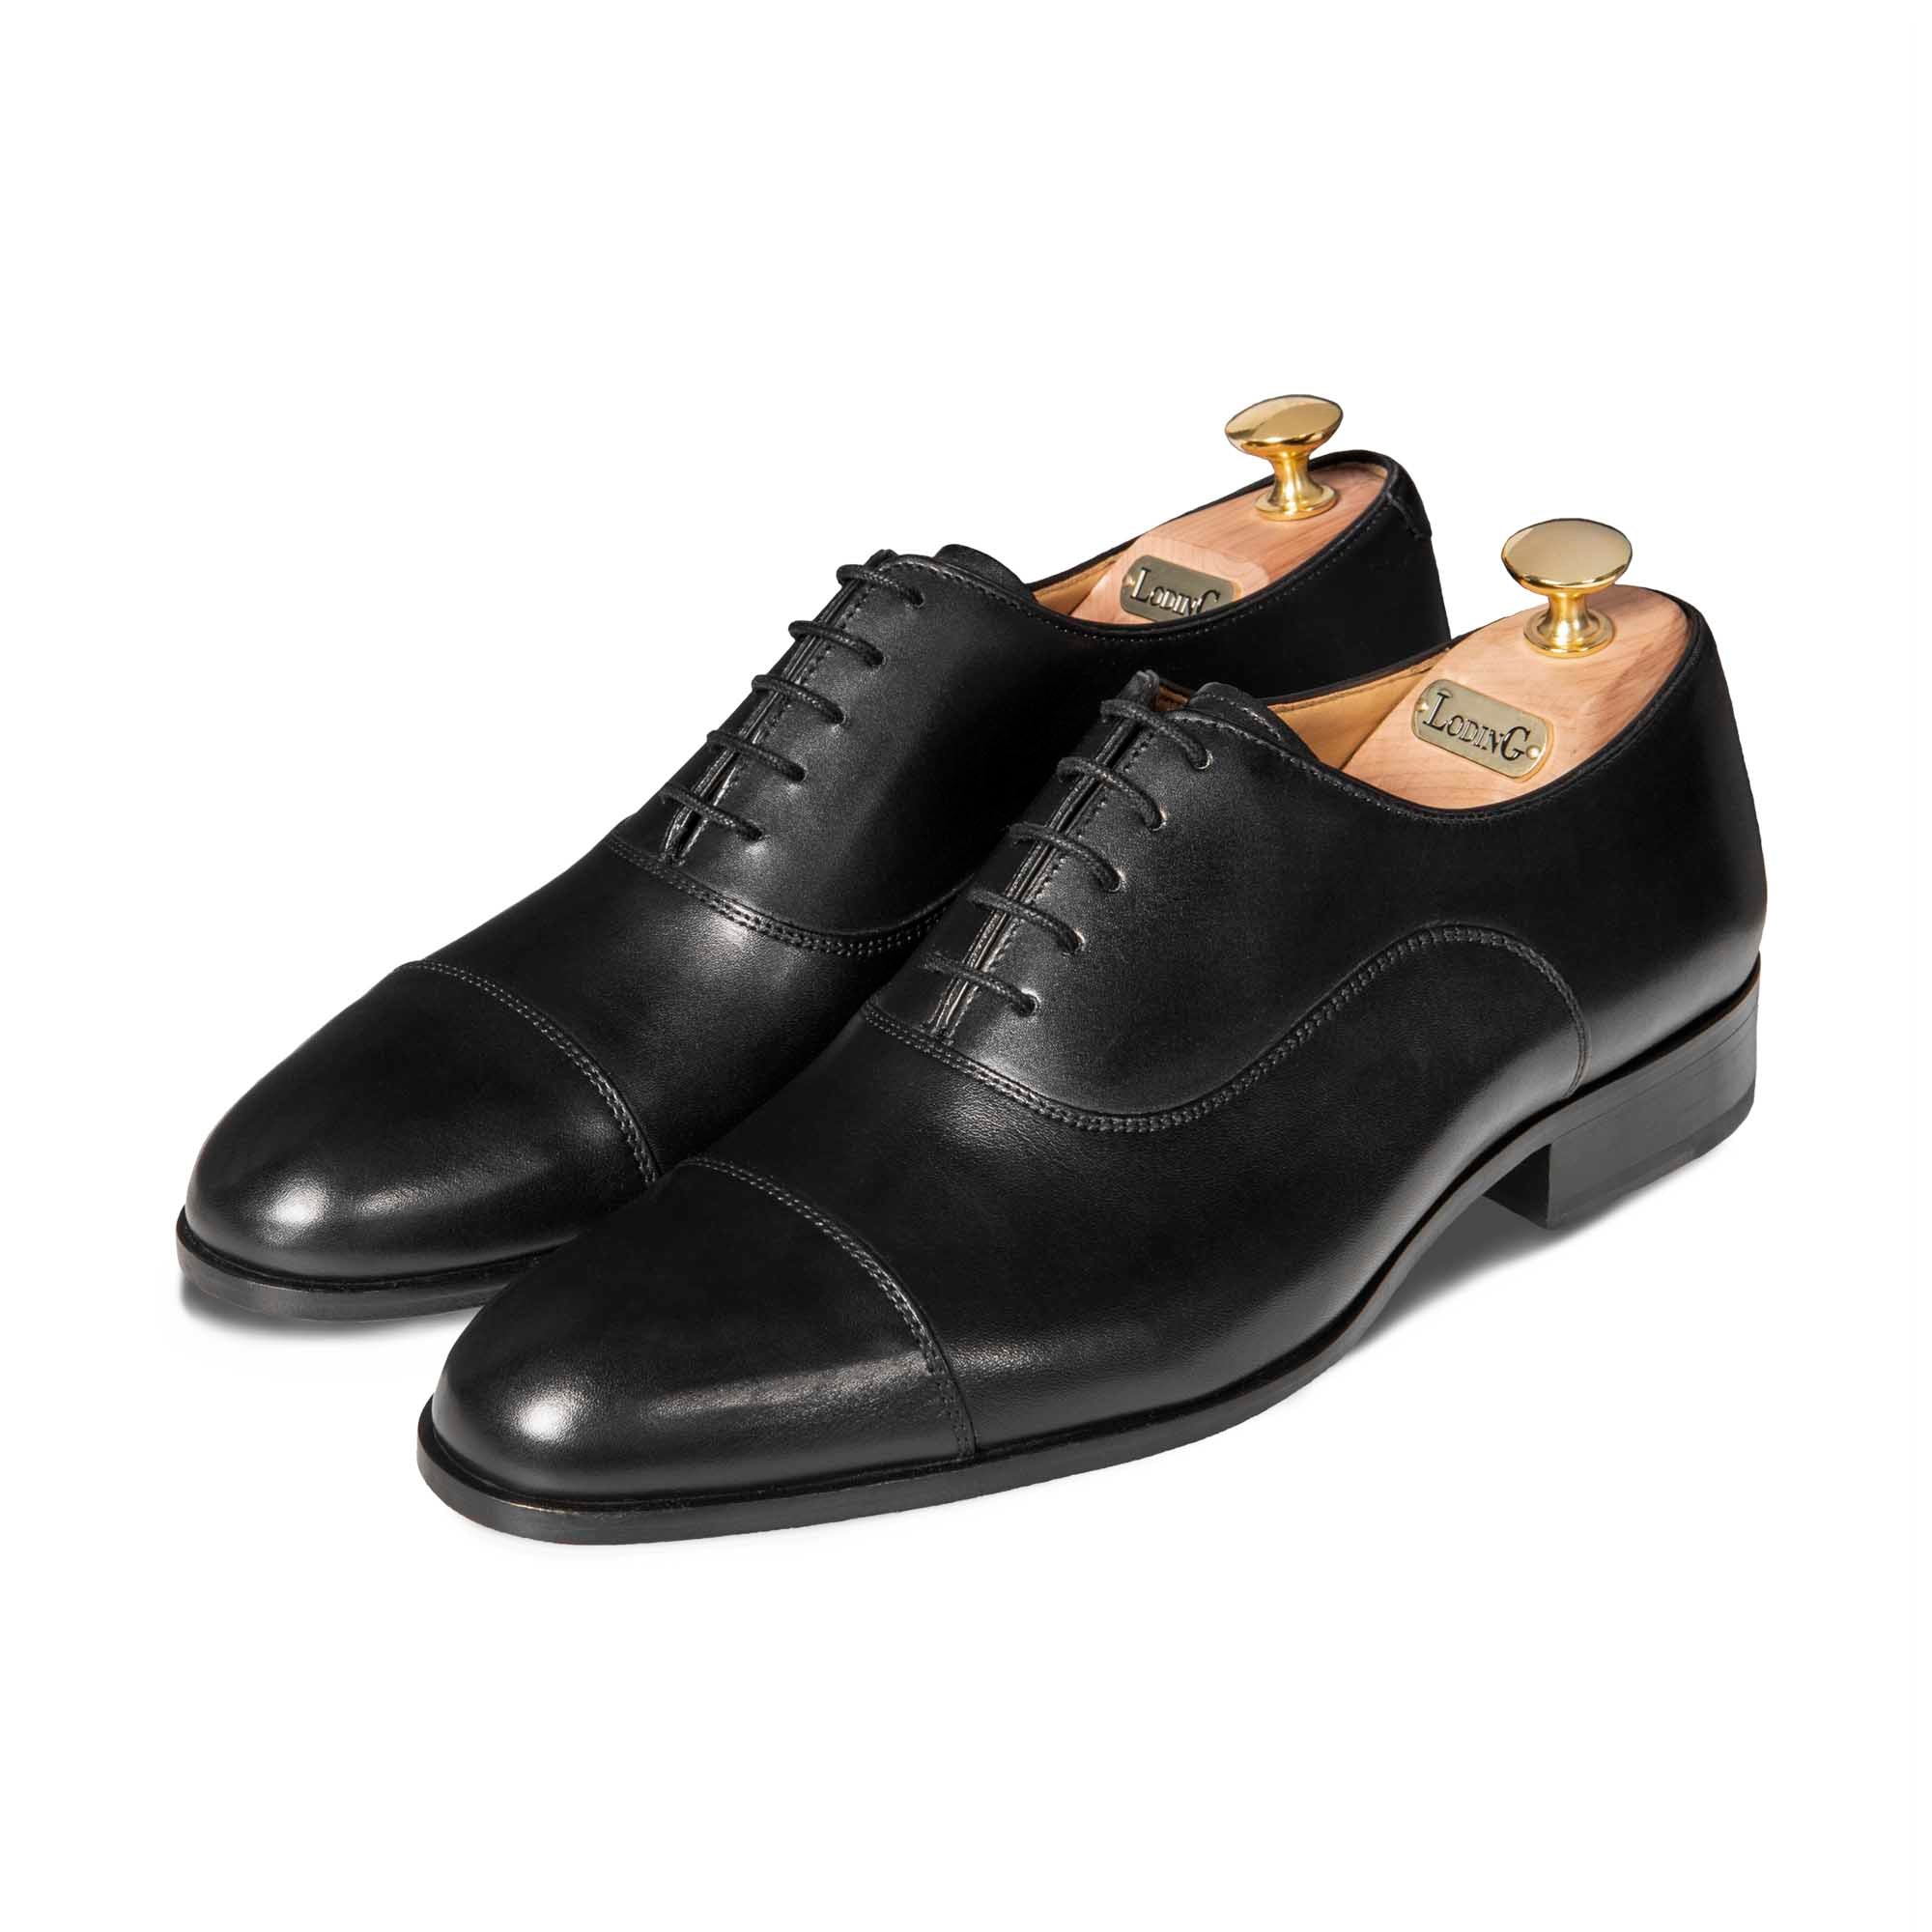 40.5 Loding cap toe shoes worn once. As new | Styleforum